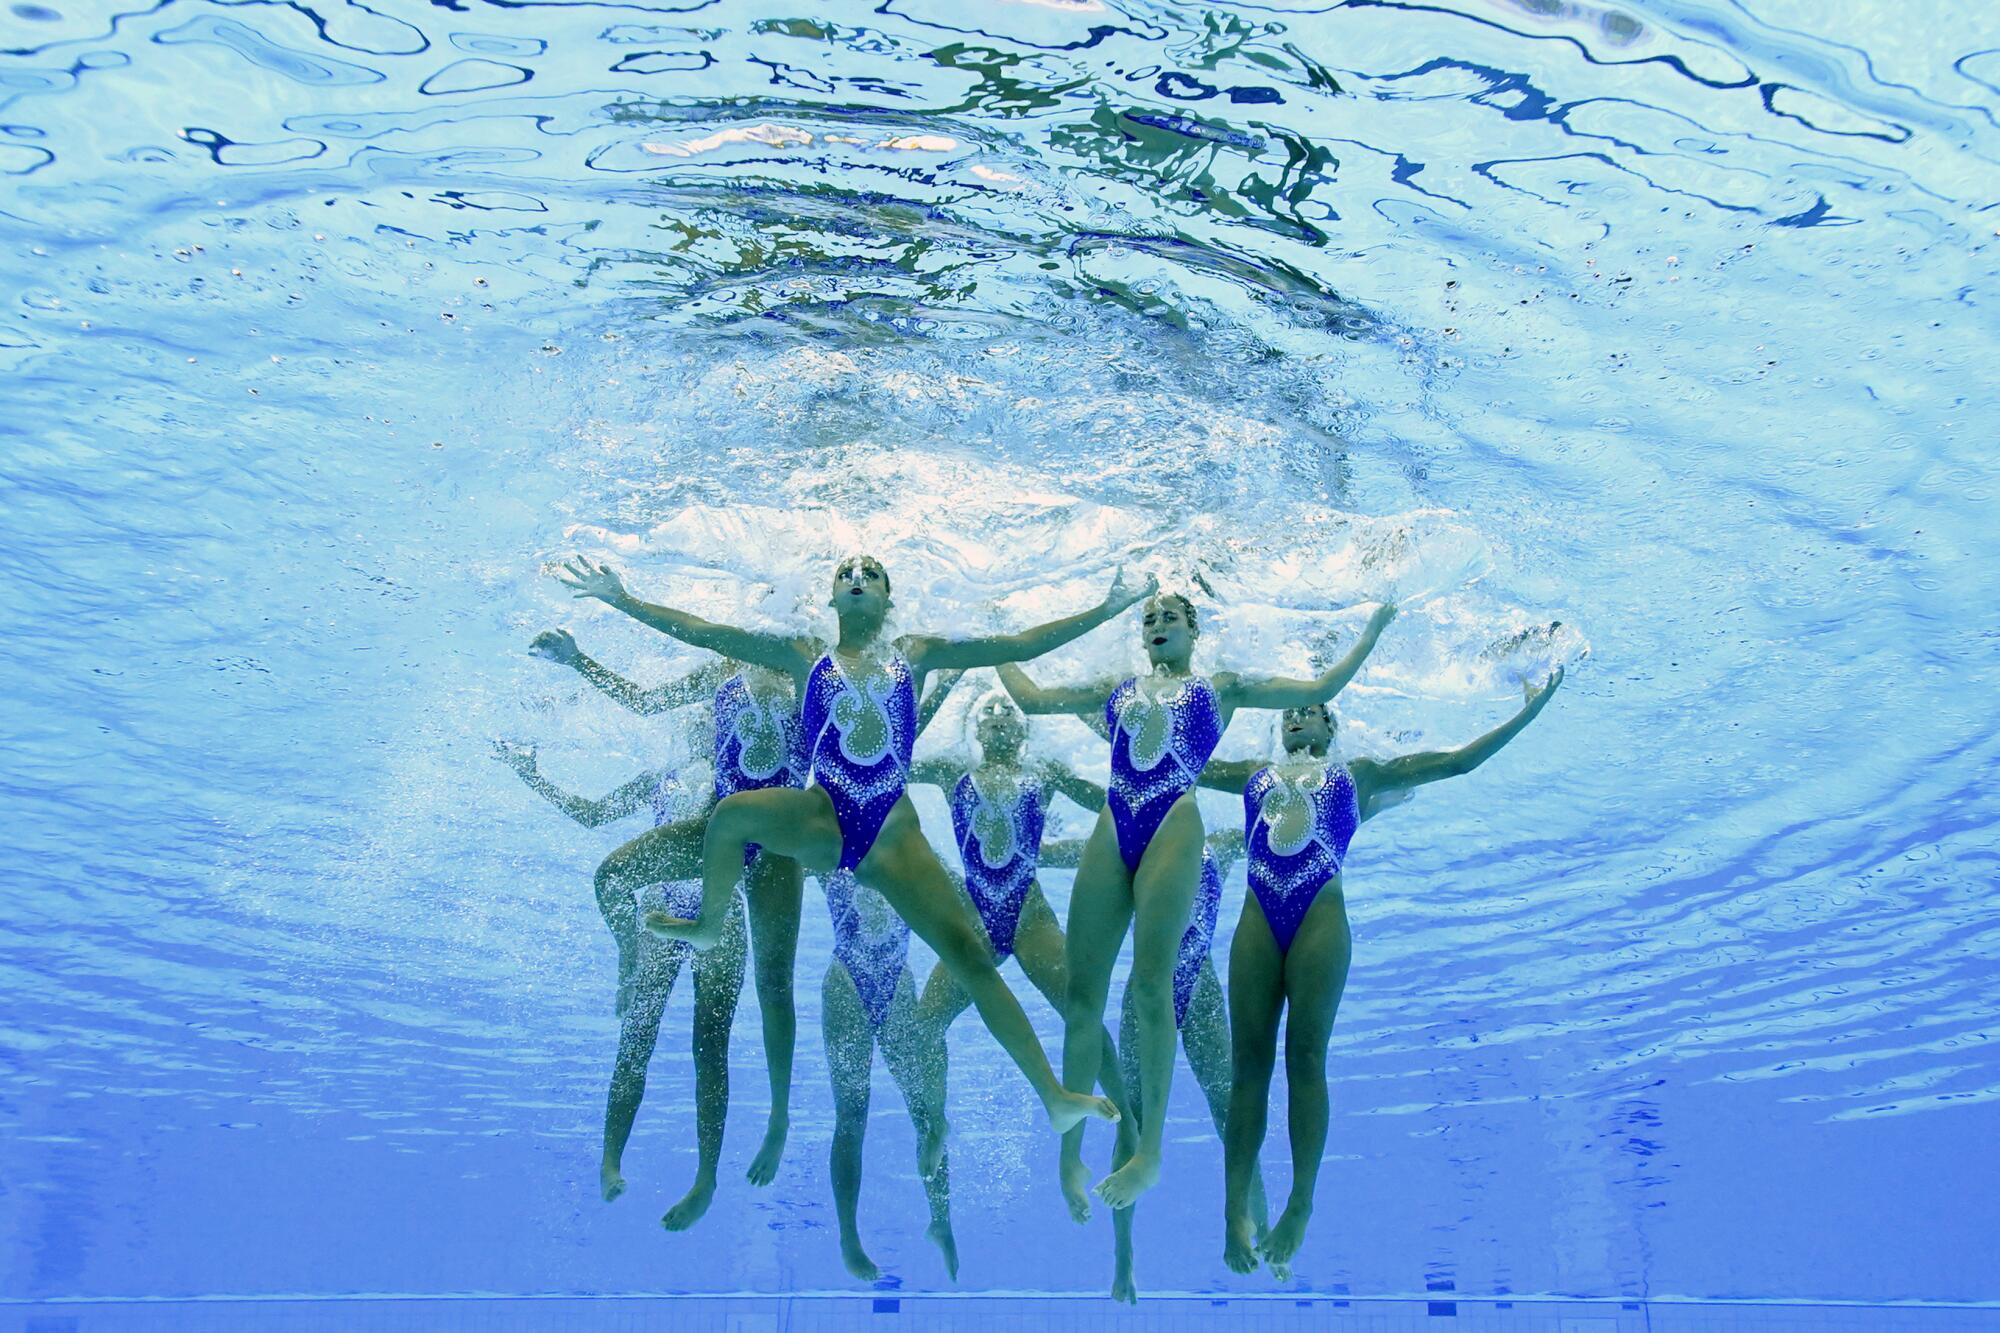 The Egypt artistic swimming team hovers underwater together